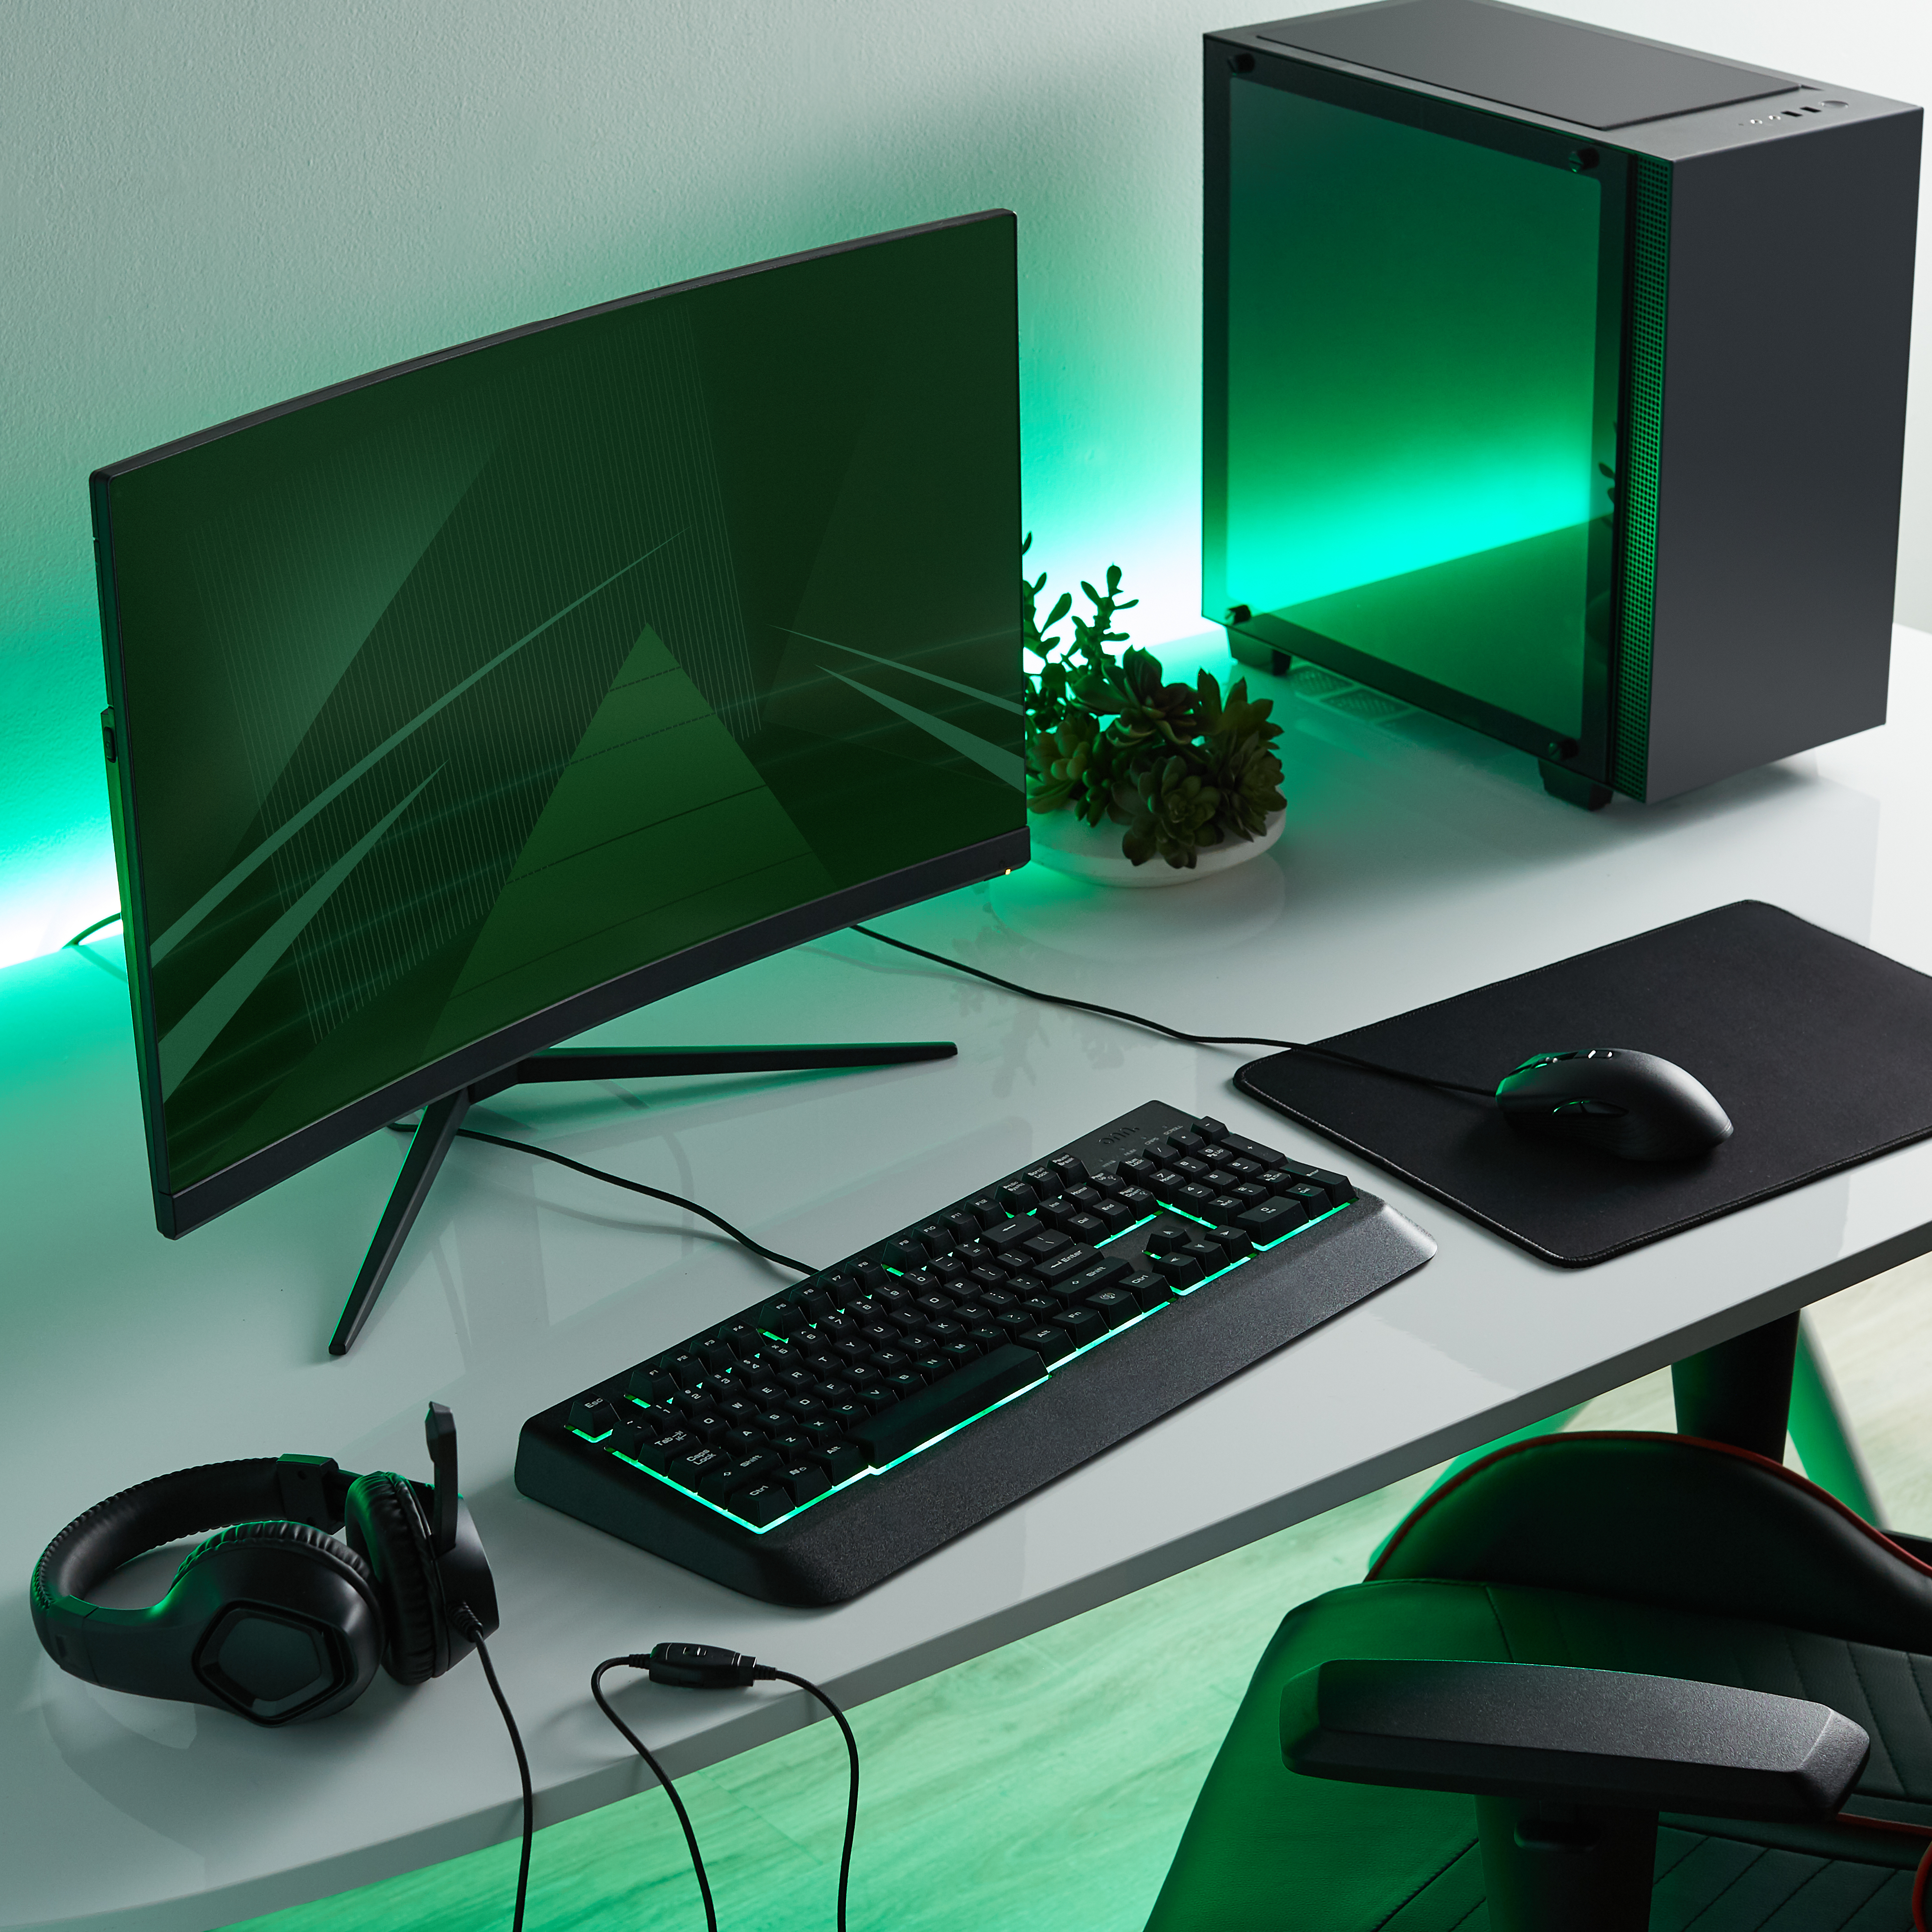 onn. 4-PC Gaming Starter Kit with LED Keyboard, Programmable Mouse, Over-ear Headset w/mic and Mouse Pad - image 1 of 29